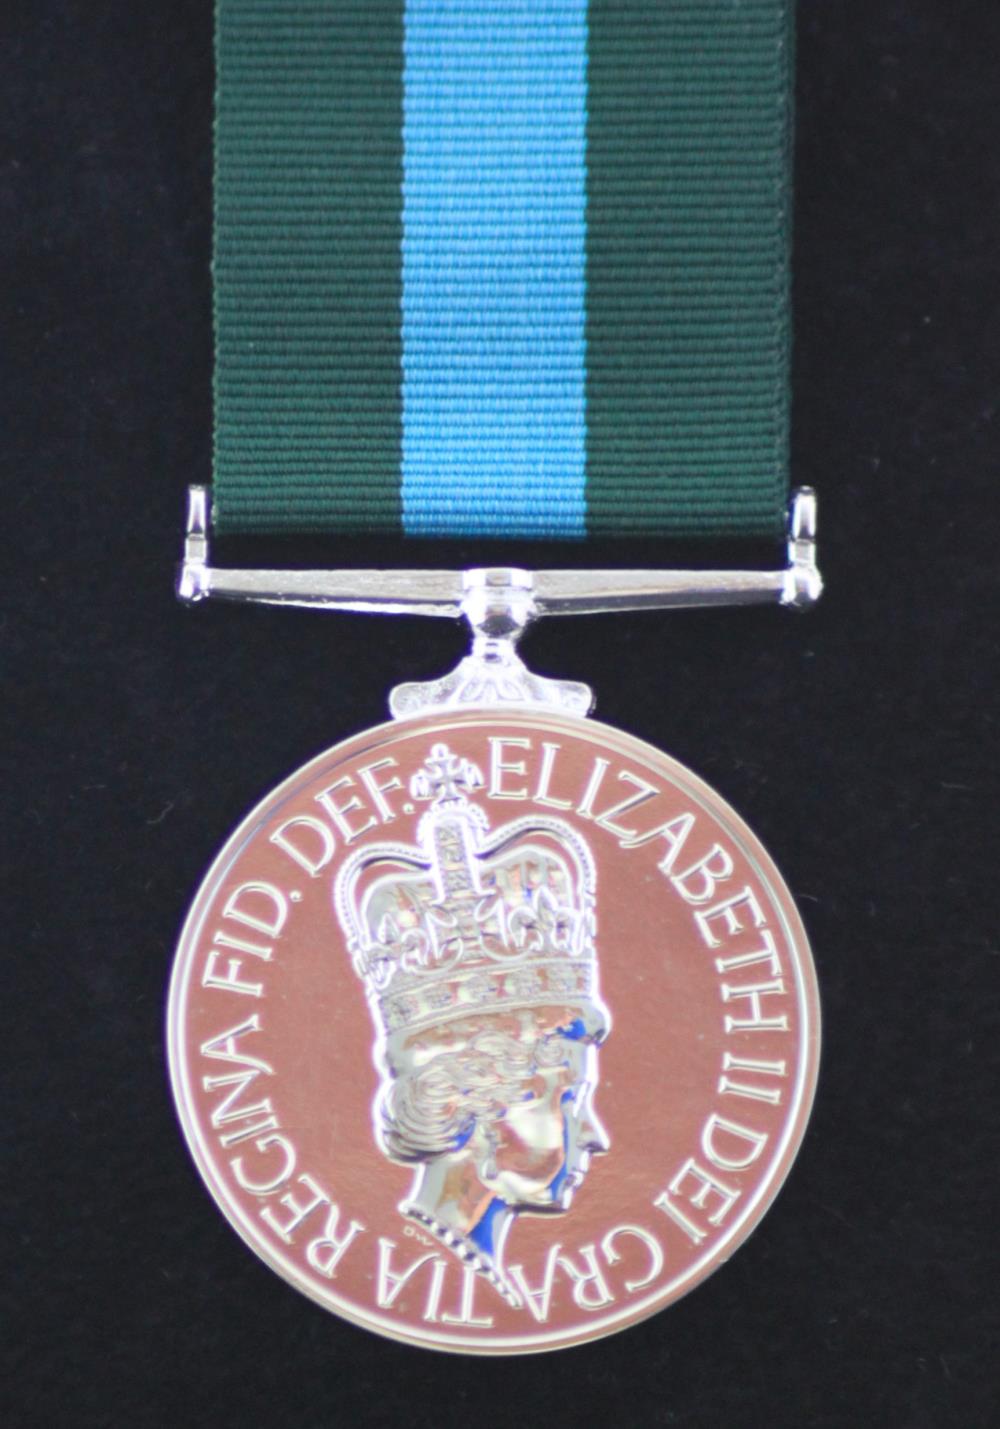 Worcestershire Medal Service: Northern Ireland Home Service Medal